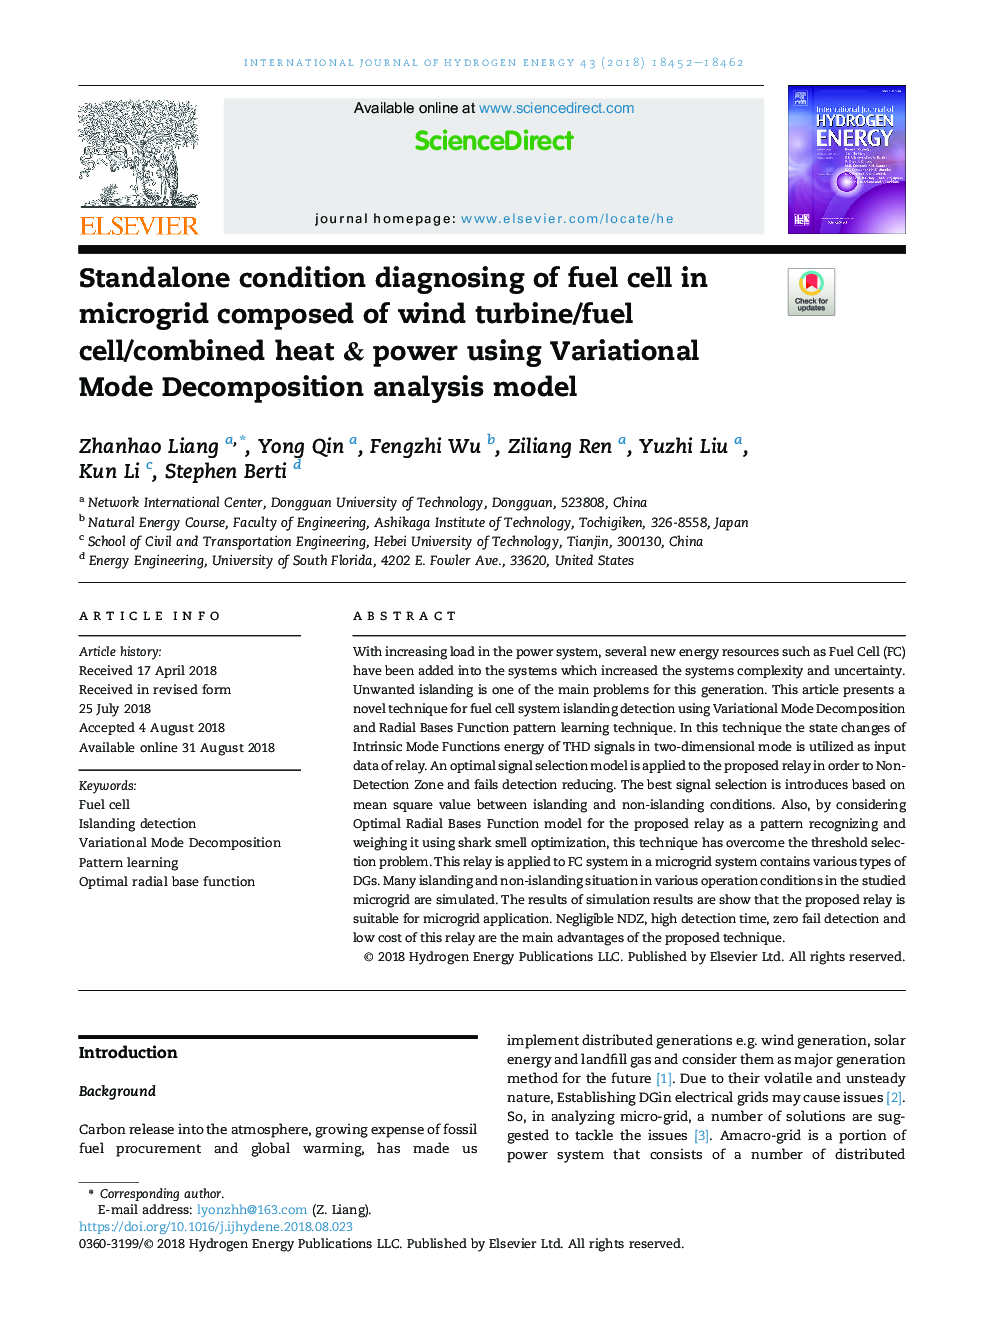 Standalone condition diagnosing of fuel cell in microgrid composed of wind turbine/fuel cell/combined heat & power using Variational Mode Decomposition analysis model